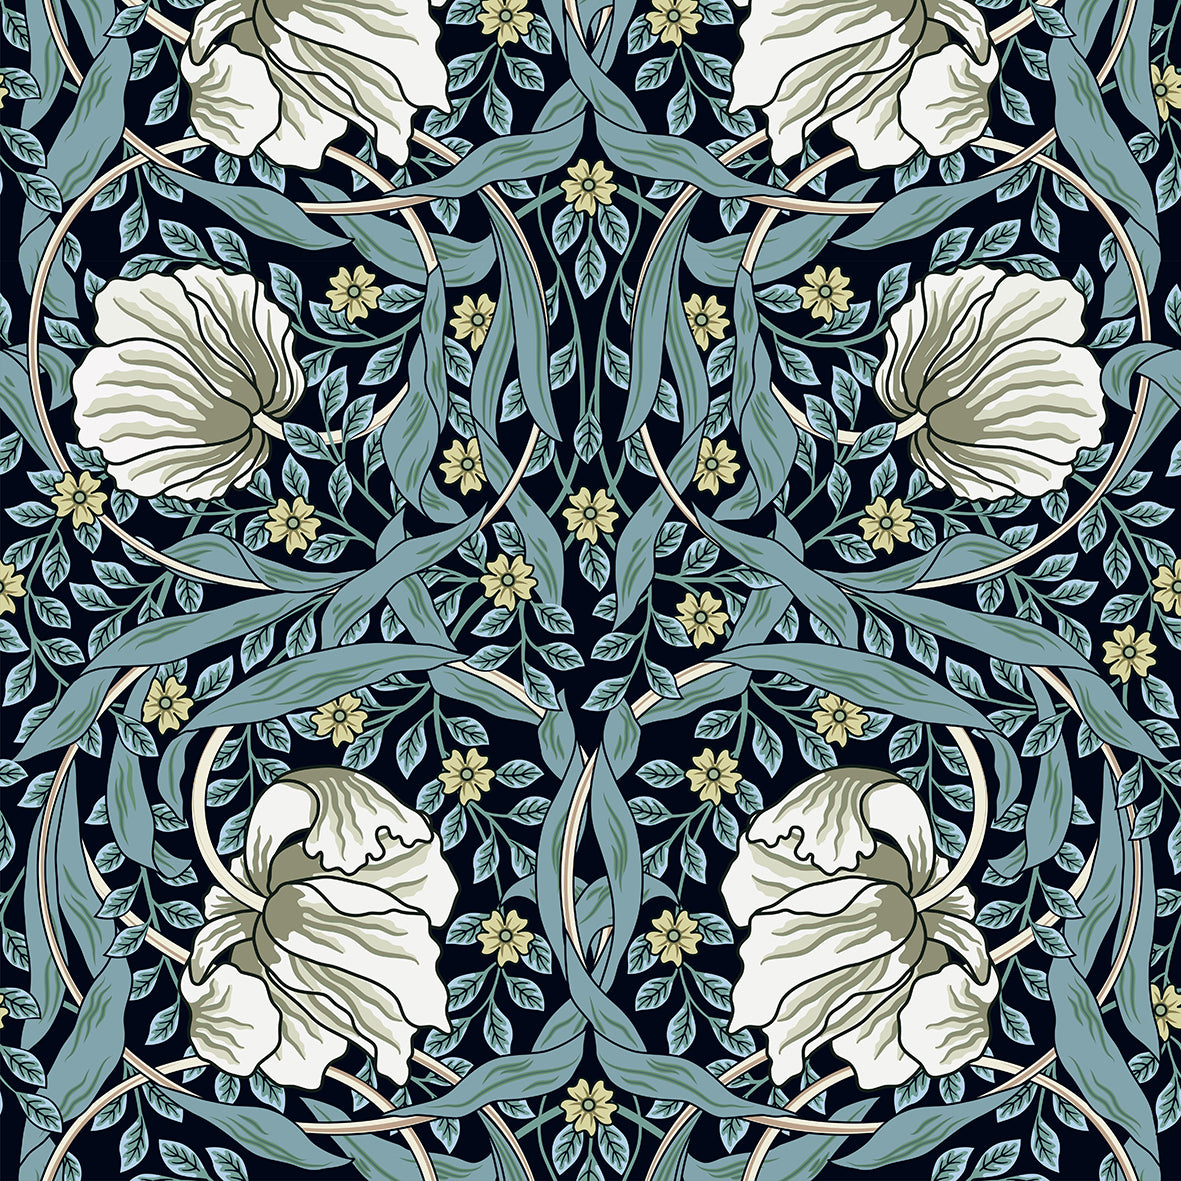 william-morris-co-heavy-duty-floor-mat-pimpernel-collection-slate-2